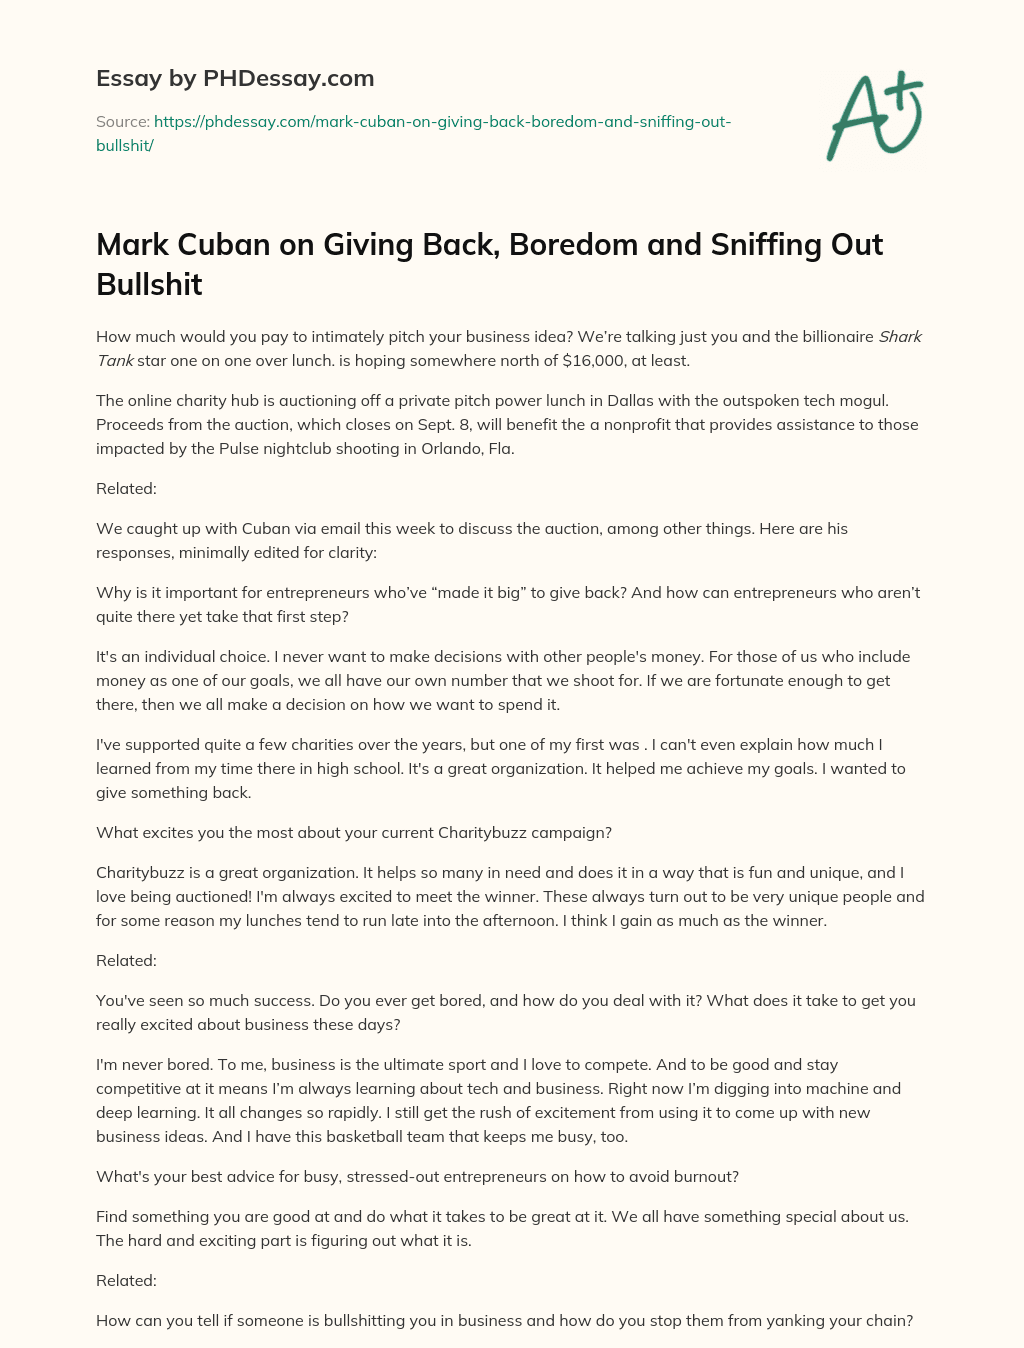 Mark Cuban on Giving Back, Boredom and Sniffing Out Bullshit essay